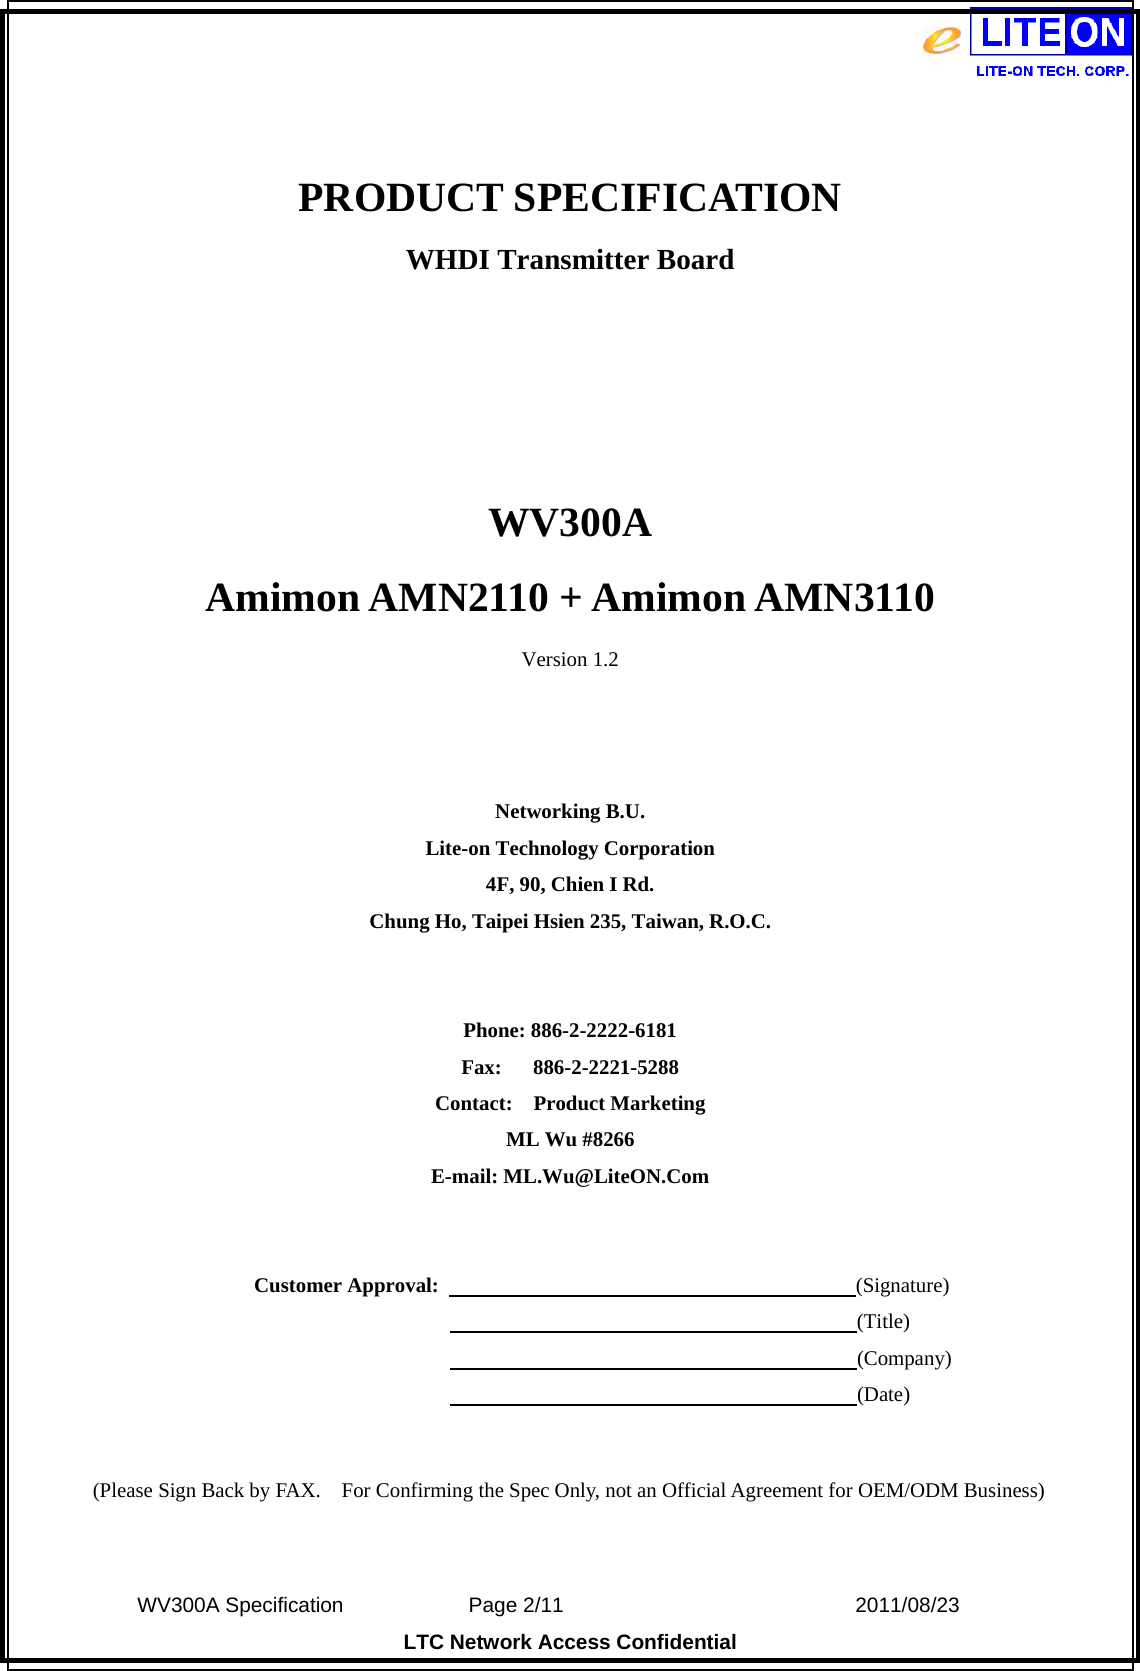  WV300A Specification             Page 2/11                            2011/08/23 LTC Network Access Confidential  PRODUCT SPECIFICATION WHDI Transmitter Board    WV300A Amimon AMN2110 + Amimon AMN3110 Version 1.2    Networking B.U. Lite-on Technology Corporation 4F, 90, Chien I Rd. Chung Ho, Taipei Hsien 235, Taiwan, R.O.C.   Phone: 886-2-2222-6181 Fax:   886-2-2221-5288 Contact:  Product Marketing ML Wu #8266 E-mail: ML.Wu@LiteON.Com     Customer Approval:                                        (Signature)                                                                      (Title)                                                                      (Company)                                                                      (Date)   (Please Sign Back by FAX.    For Confirming the Spec Only, not an Official Agreement for OEM/ODM Business) 